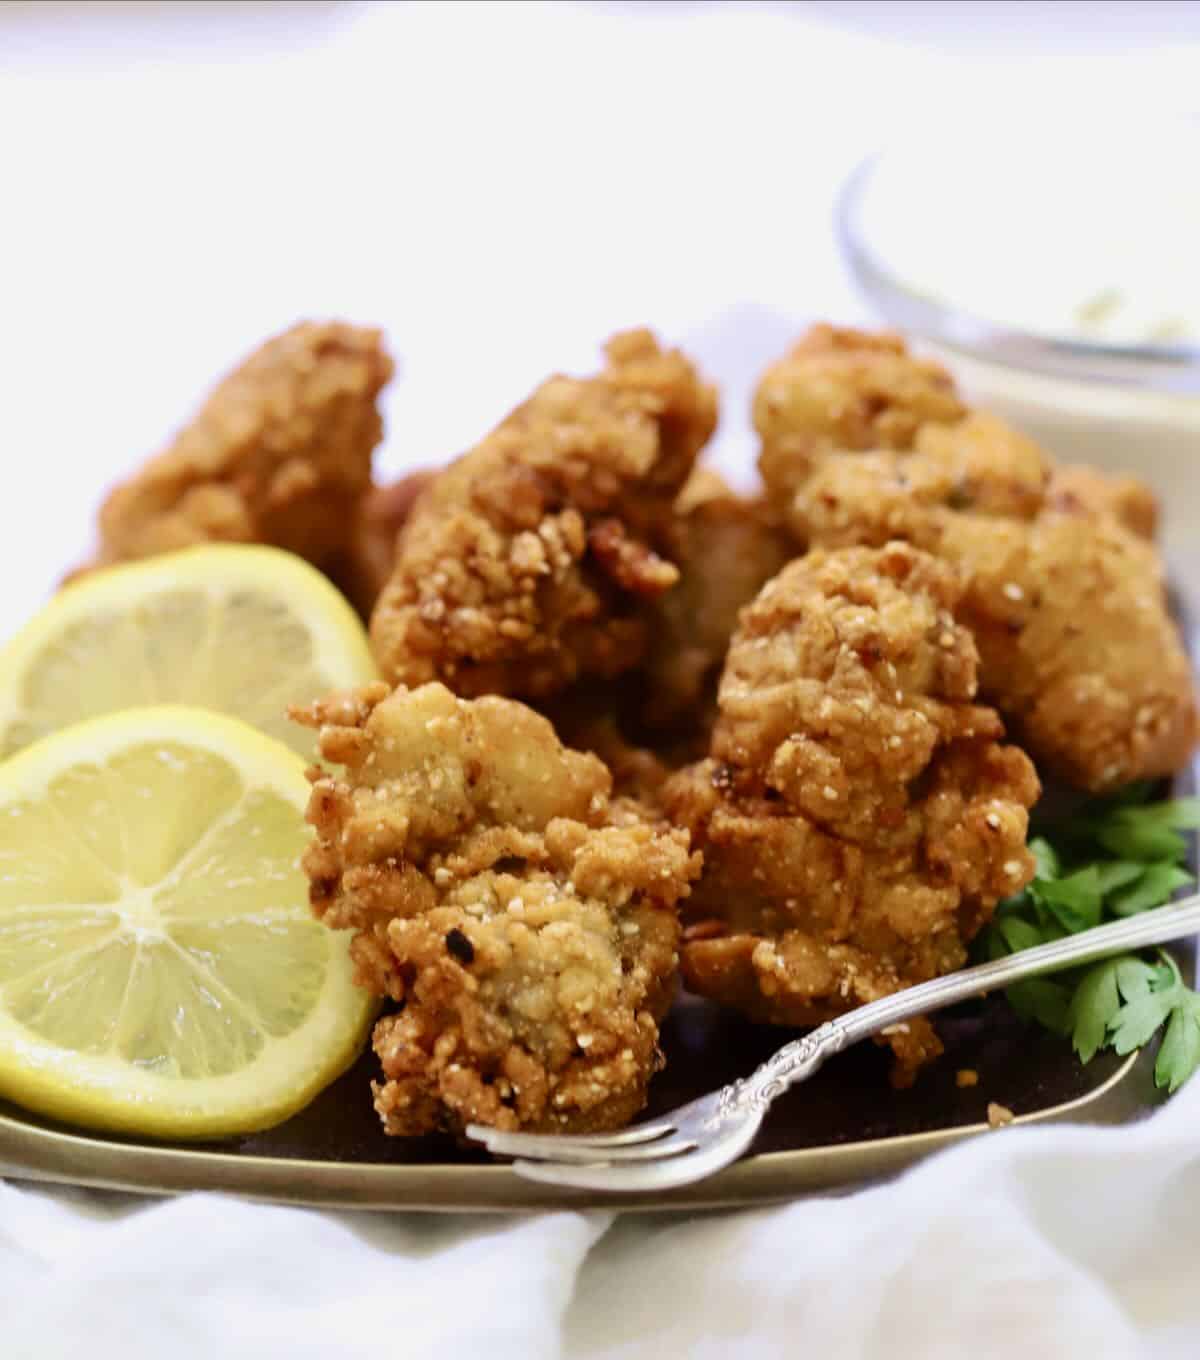 Fried oysters on a plate garnished with lemon slices.